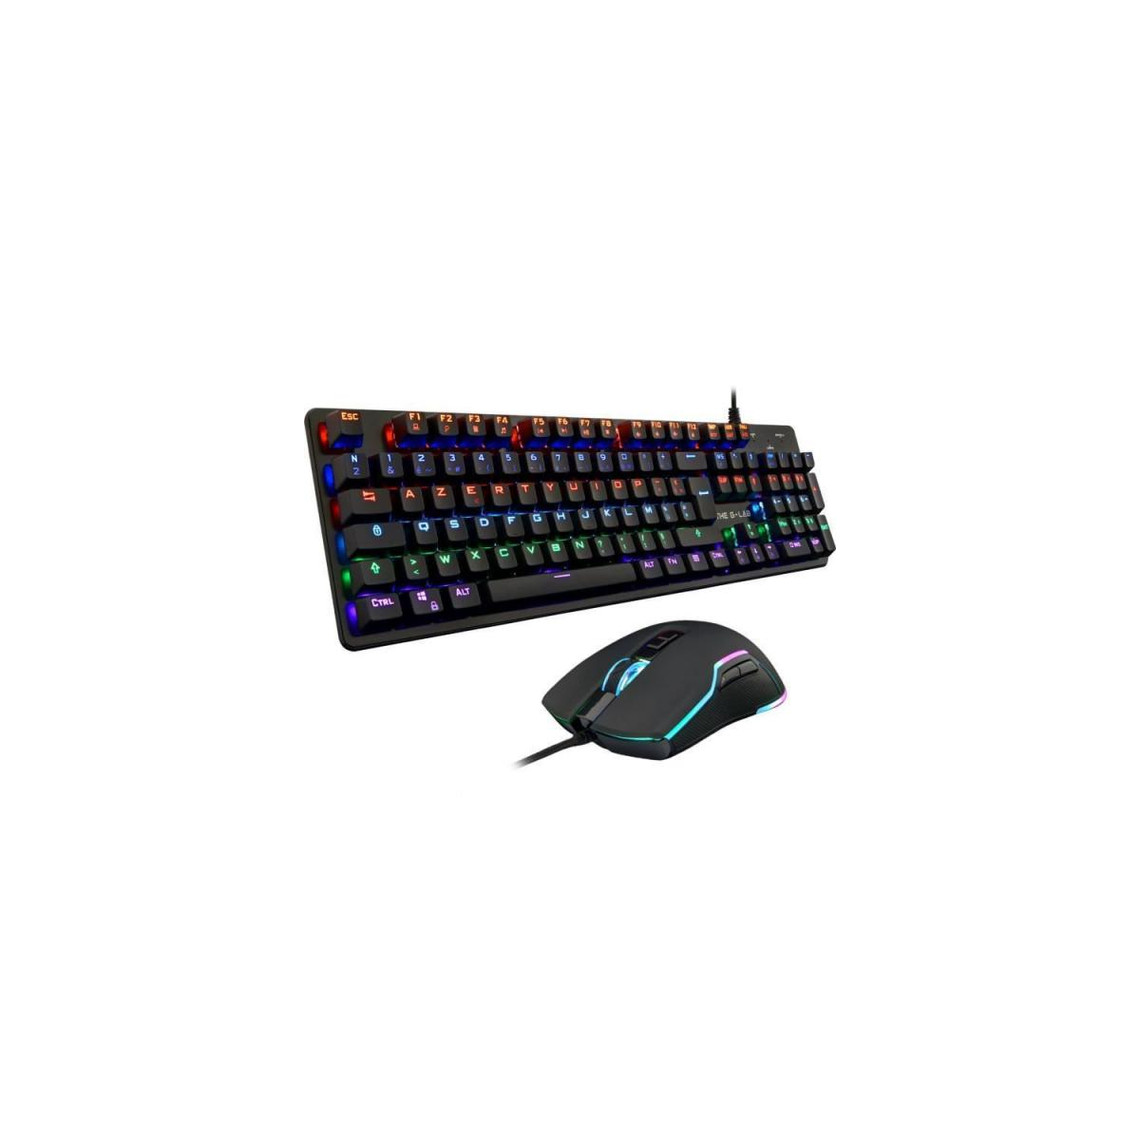 The G-Lab Combo CARBON - THE G-LAB - Pack Clavier et Souris Gamer RGB Filaire - Clavier Gaming Mécanique